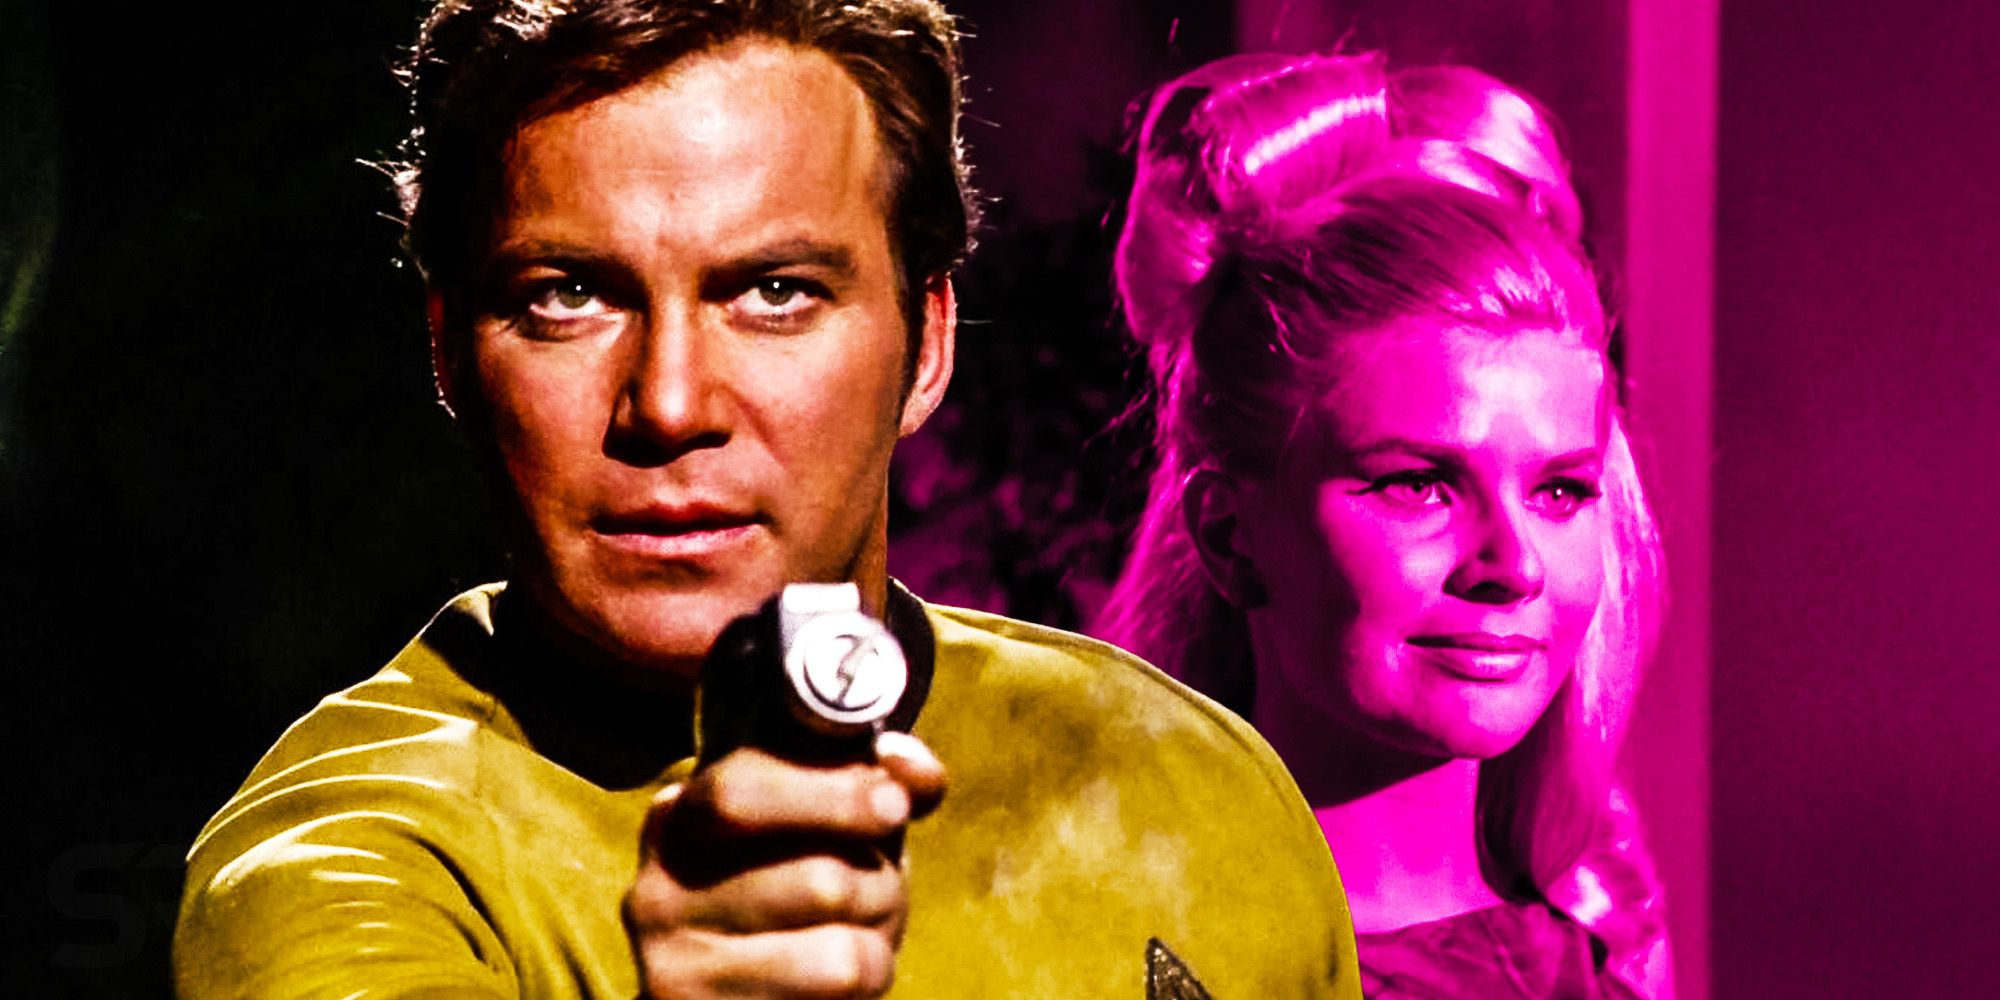 An Underrated TOS Episode Had Kirk’s Most Questionable Romance